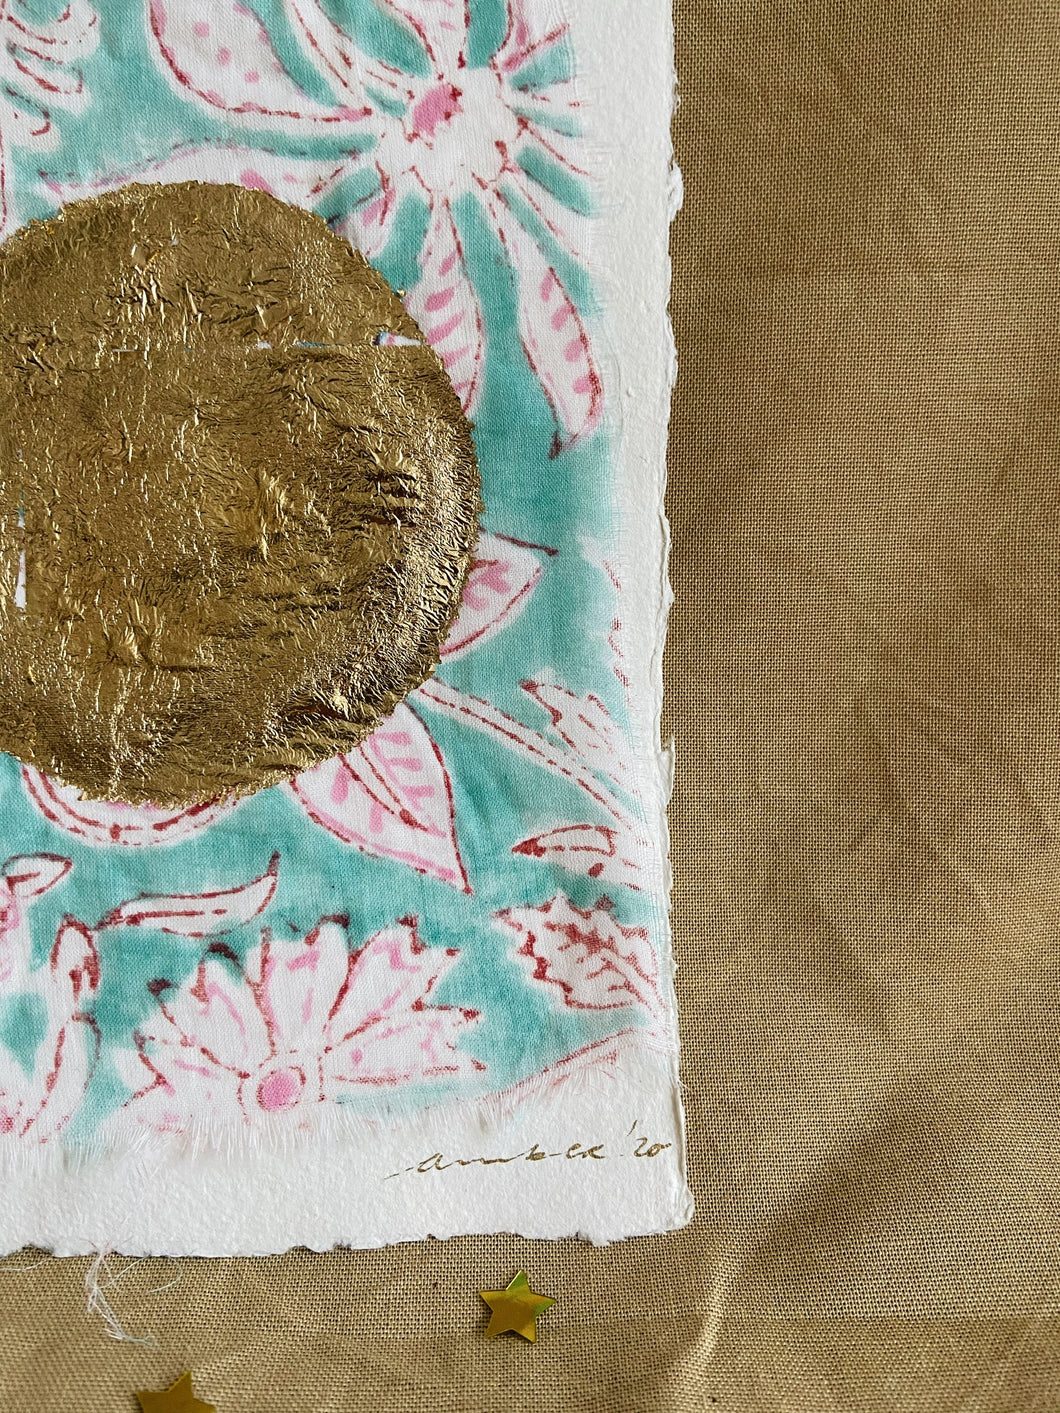 Vintage Moon on Cotton paper (with or without frame) - Turquoise/Pink